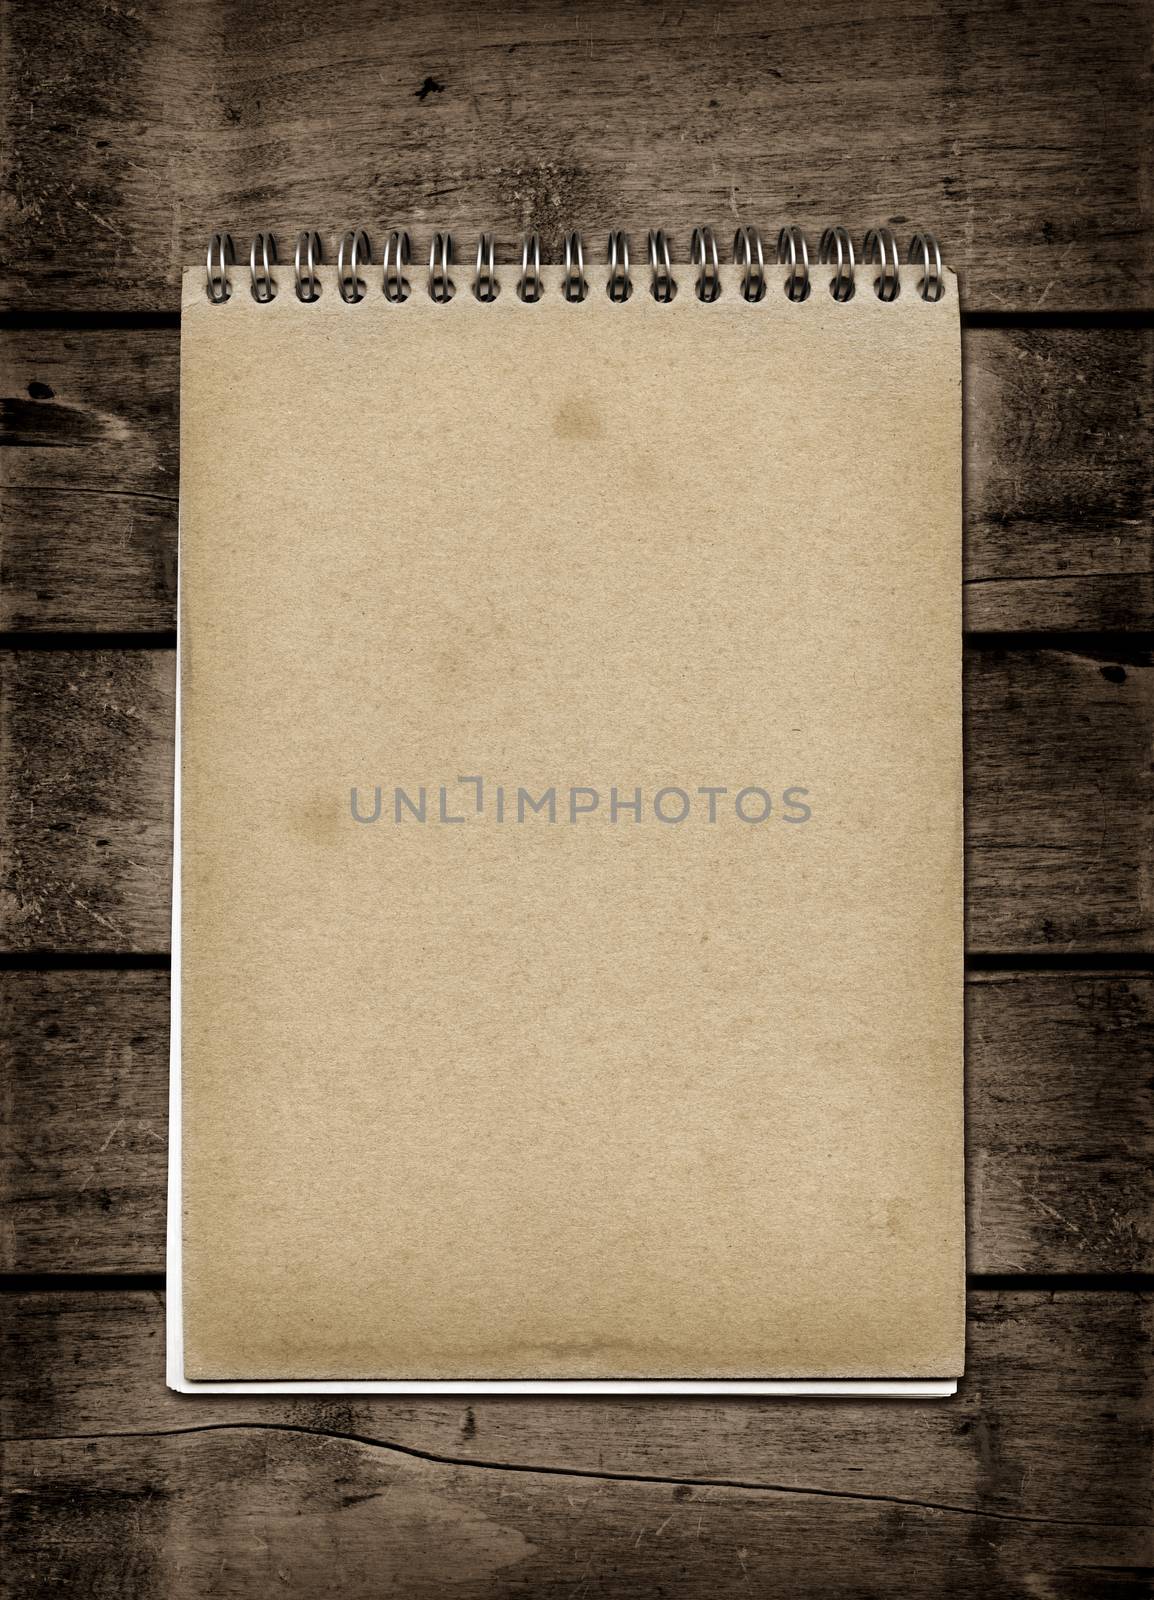 Closed spiral Note book on a dark wood table. Mockup